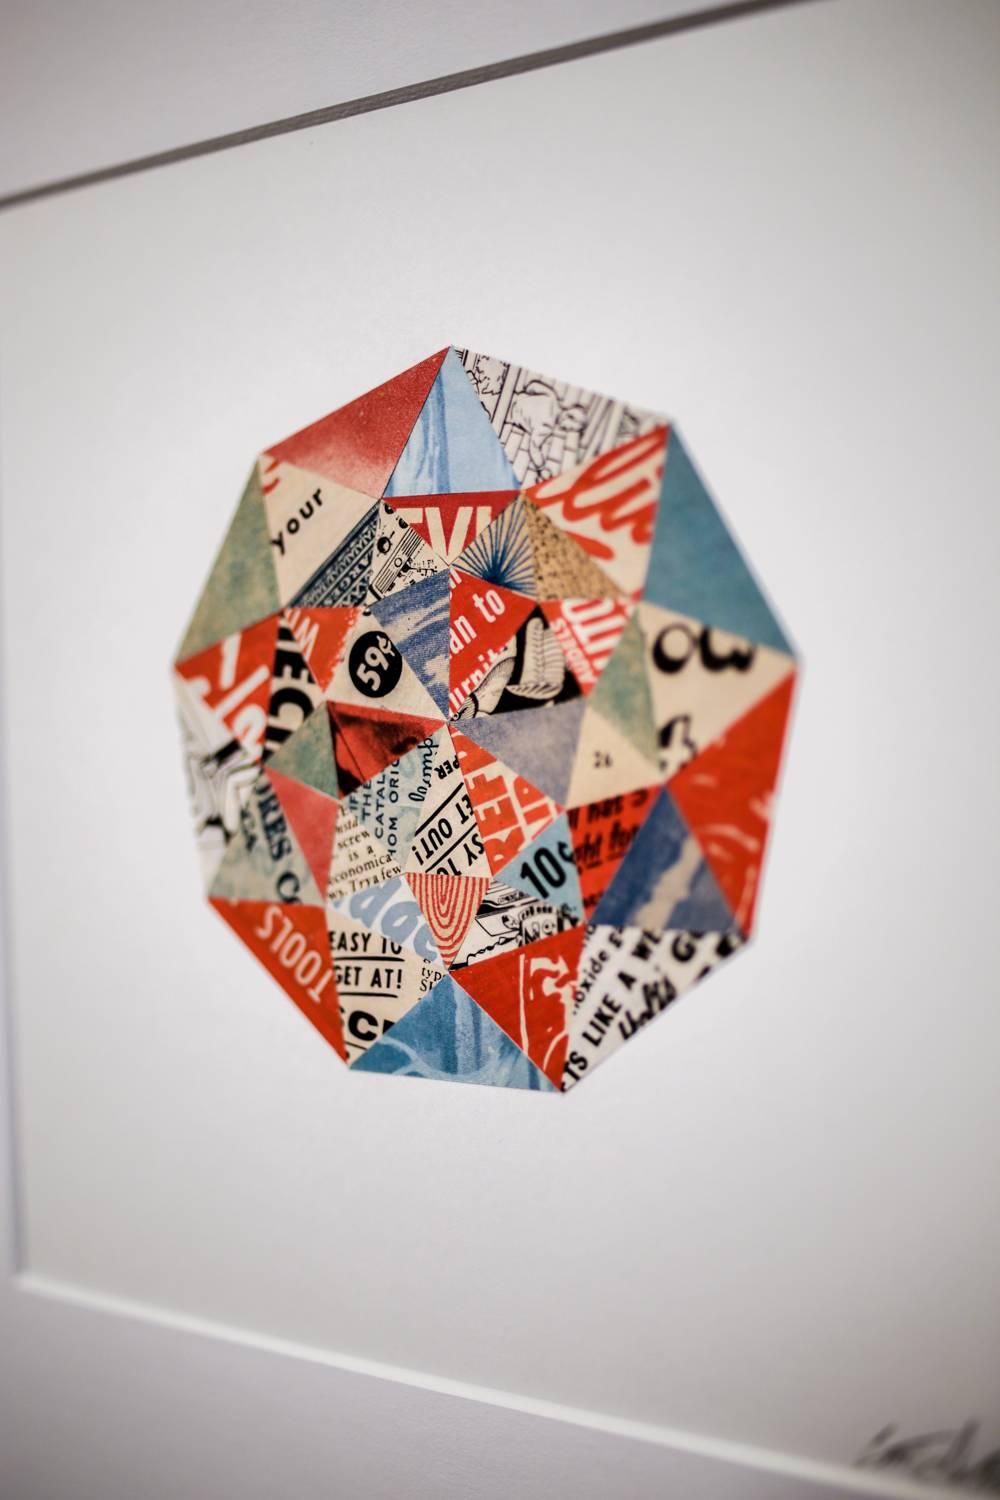 4in x 4in collage in a 14.25in x 14.25in frame

Scott Albrecht is currently based in Brooklyn, NY and a member of The Gowanus Studio Space. His work incorporates elements of woodworking, hand-drawn typography and geometric collage using vintage